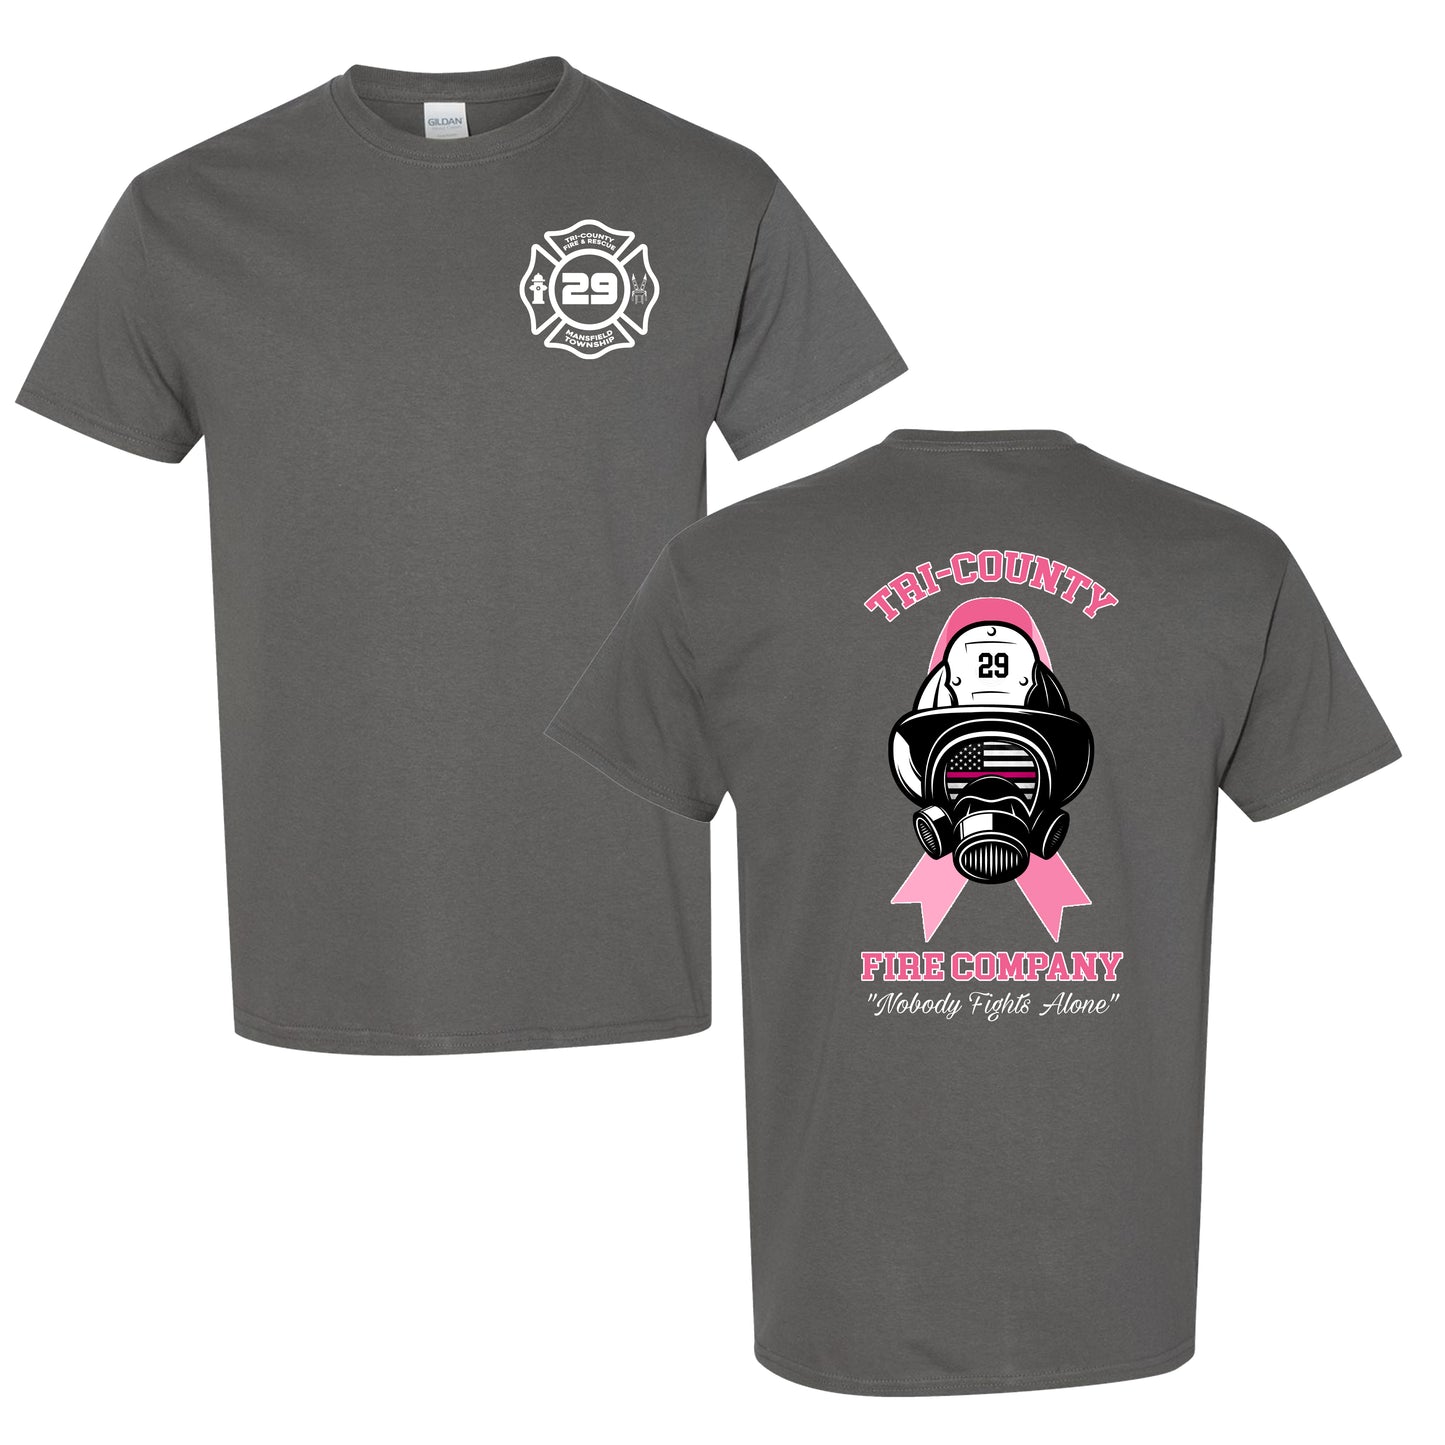 Tri-County Breast Cancer Awareness T-Shirt